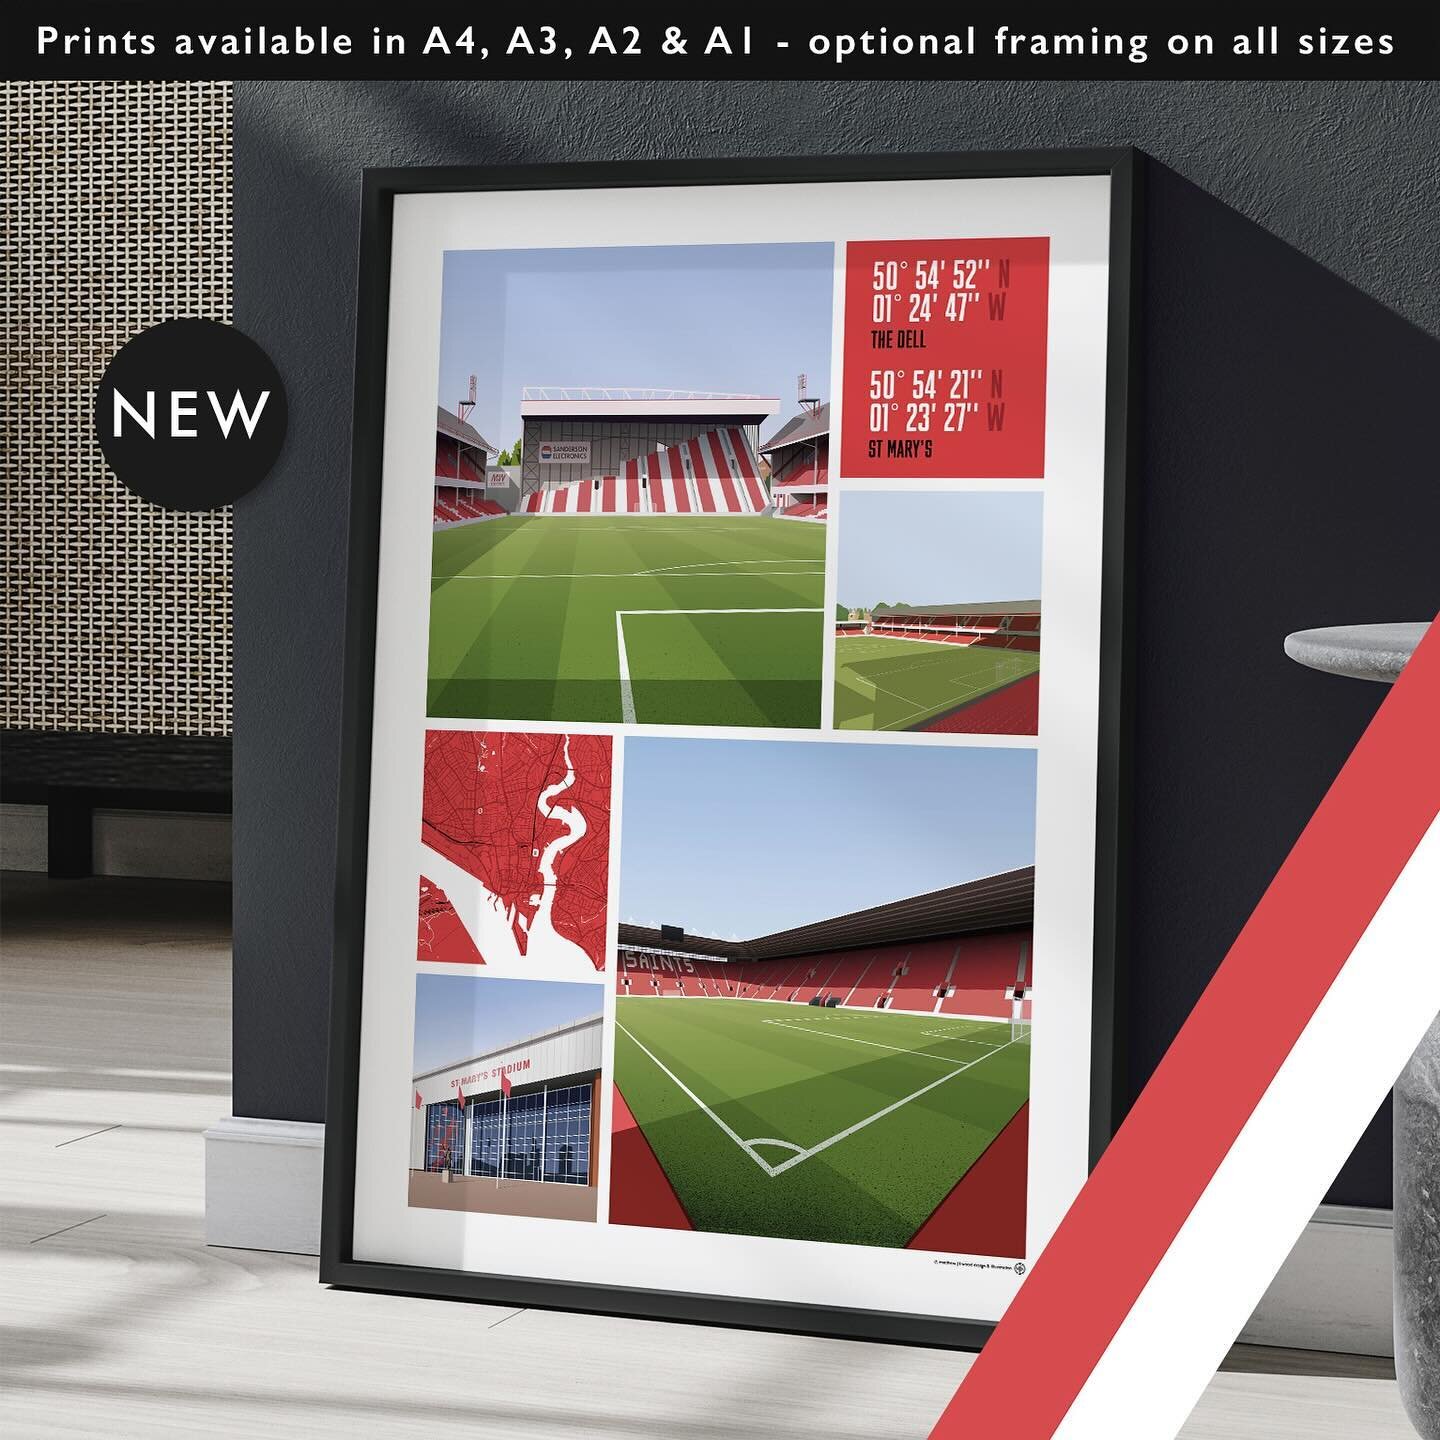 NEW: Views Of The Dell &amp; St Mary&rsquo;s 

Prints available in A4, A3, A2 &amp; A1 with optional framing 

Get 10% off until midnight with the discount code 
THE-SAINTS

Visit: matthewjiwood.com/championship-g&hellip;

#SouthamptonFC #SaintsFC #S